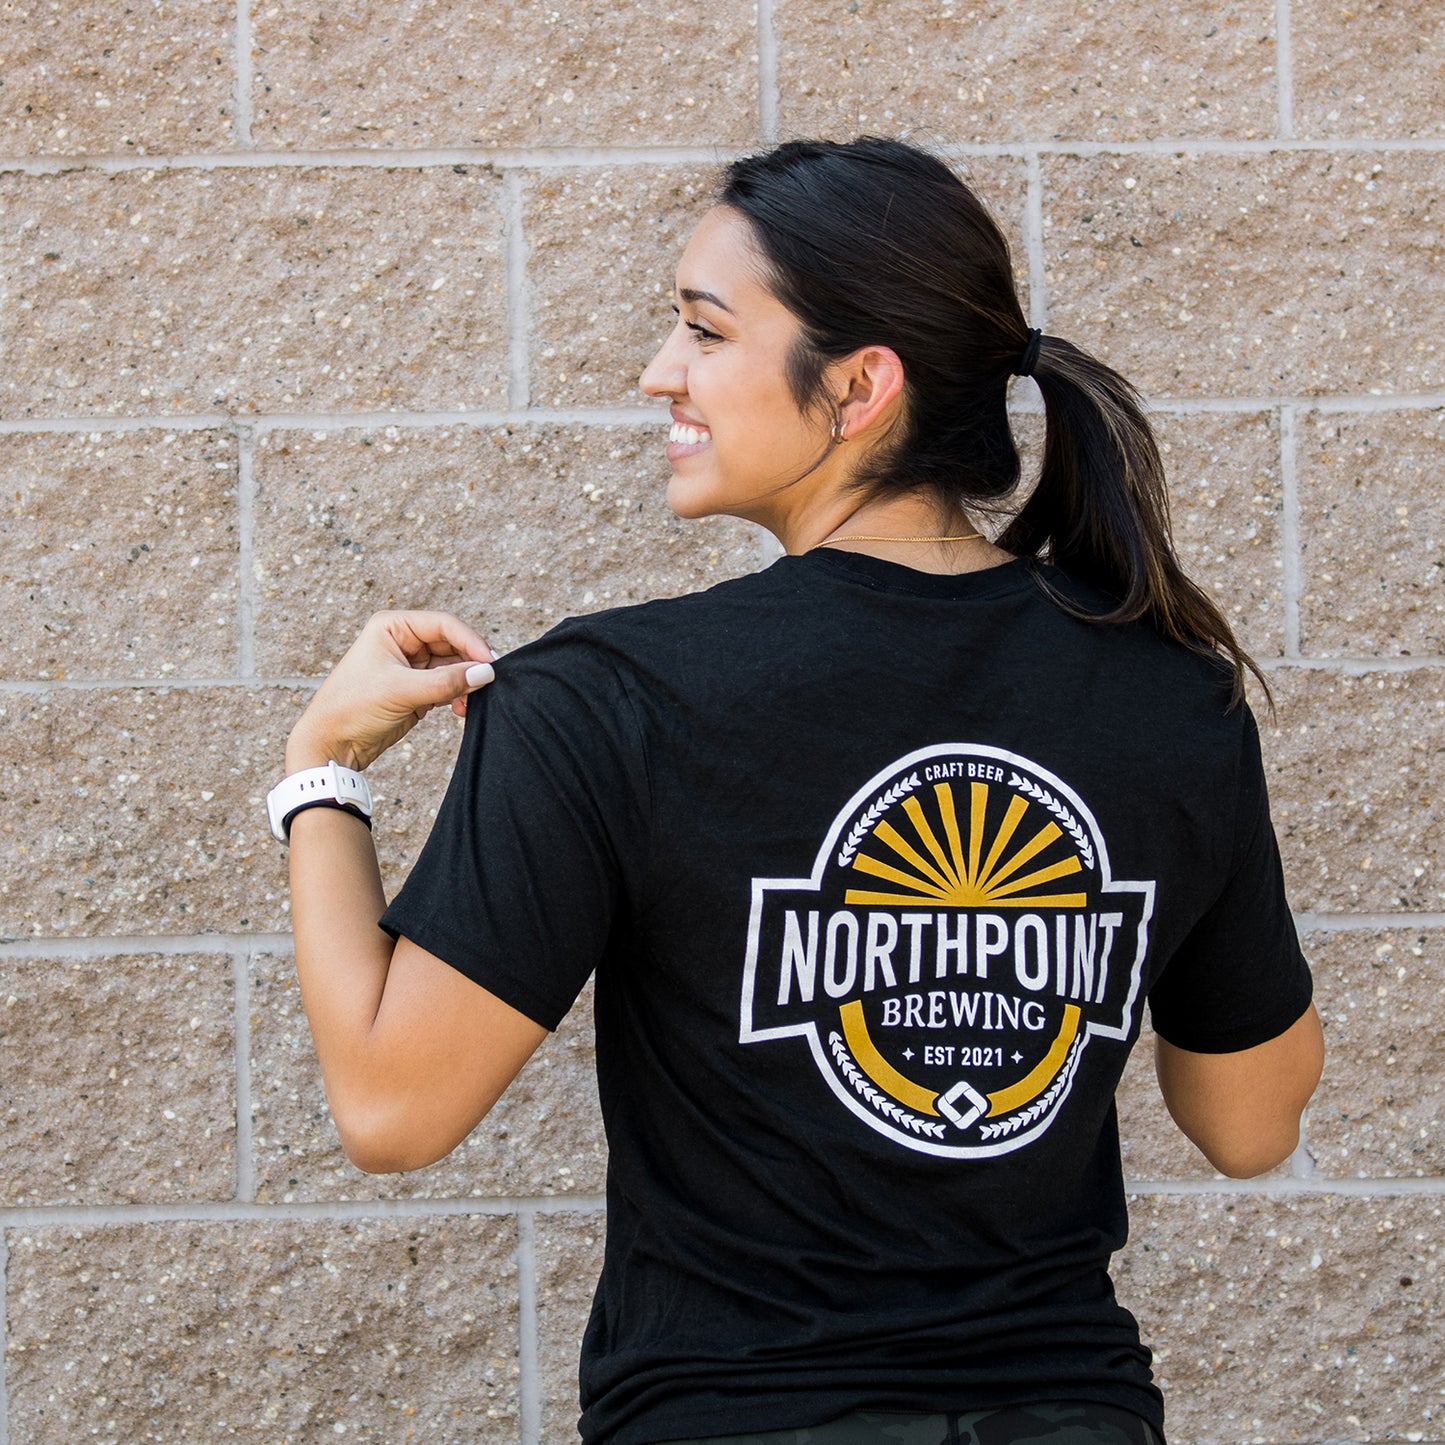 NorthPoint Brewery T-Shirt